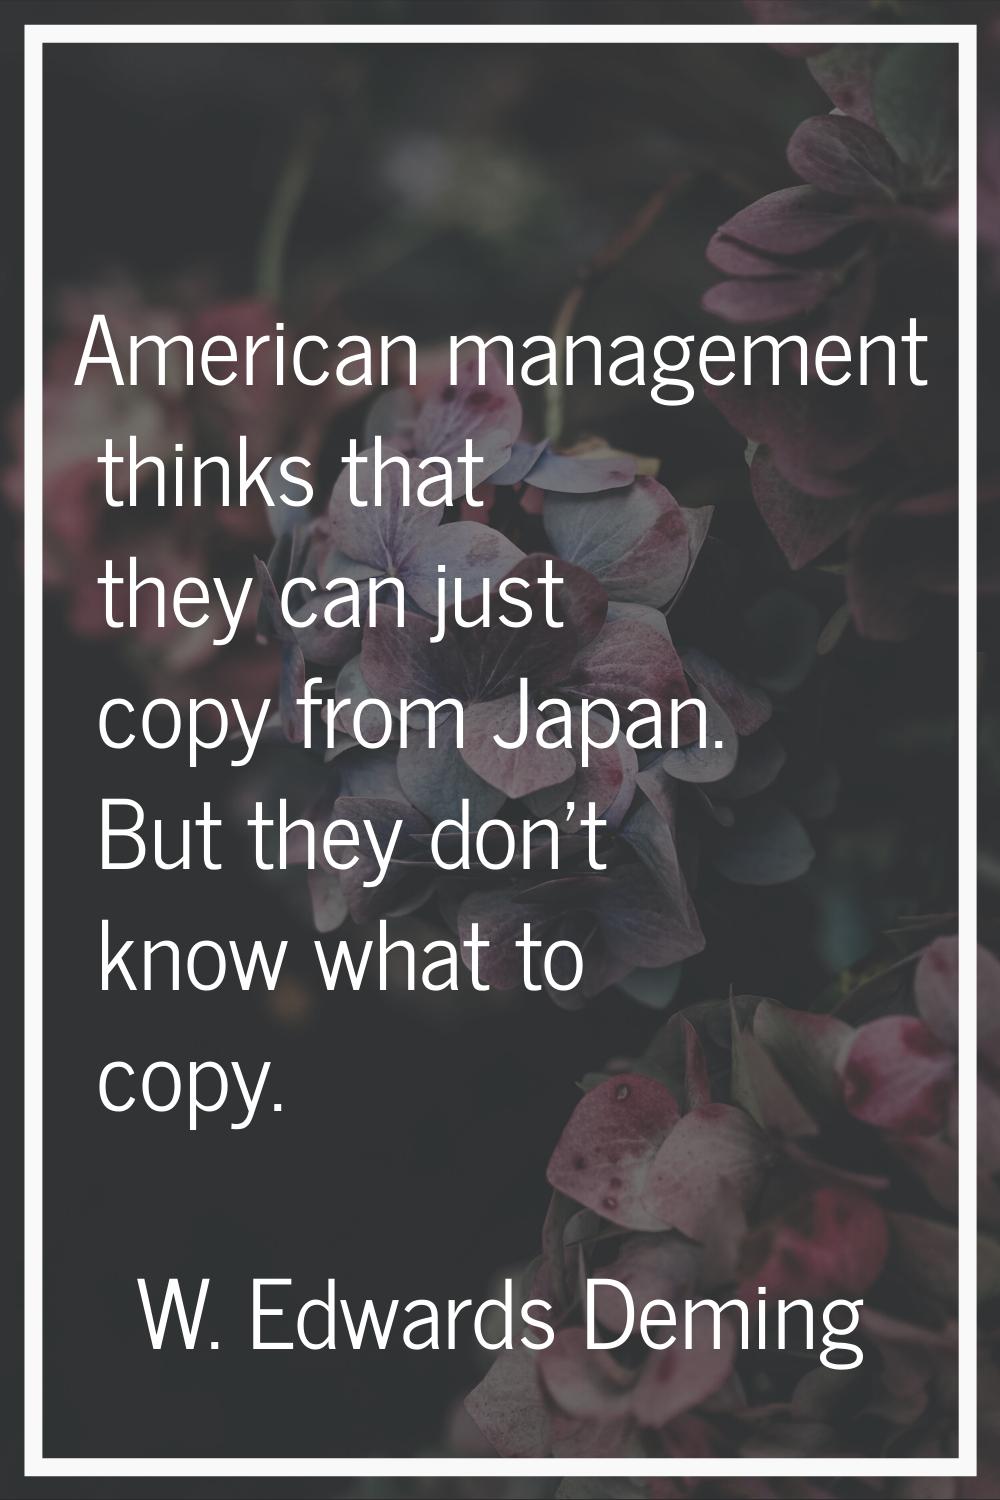 American management thinks that they can just copy from Japan. But they don't know what to copy.